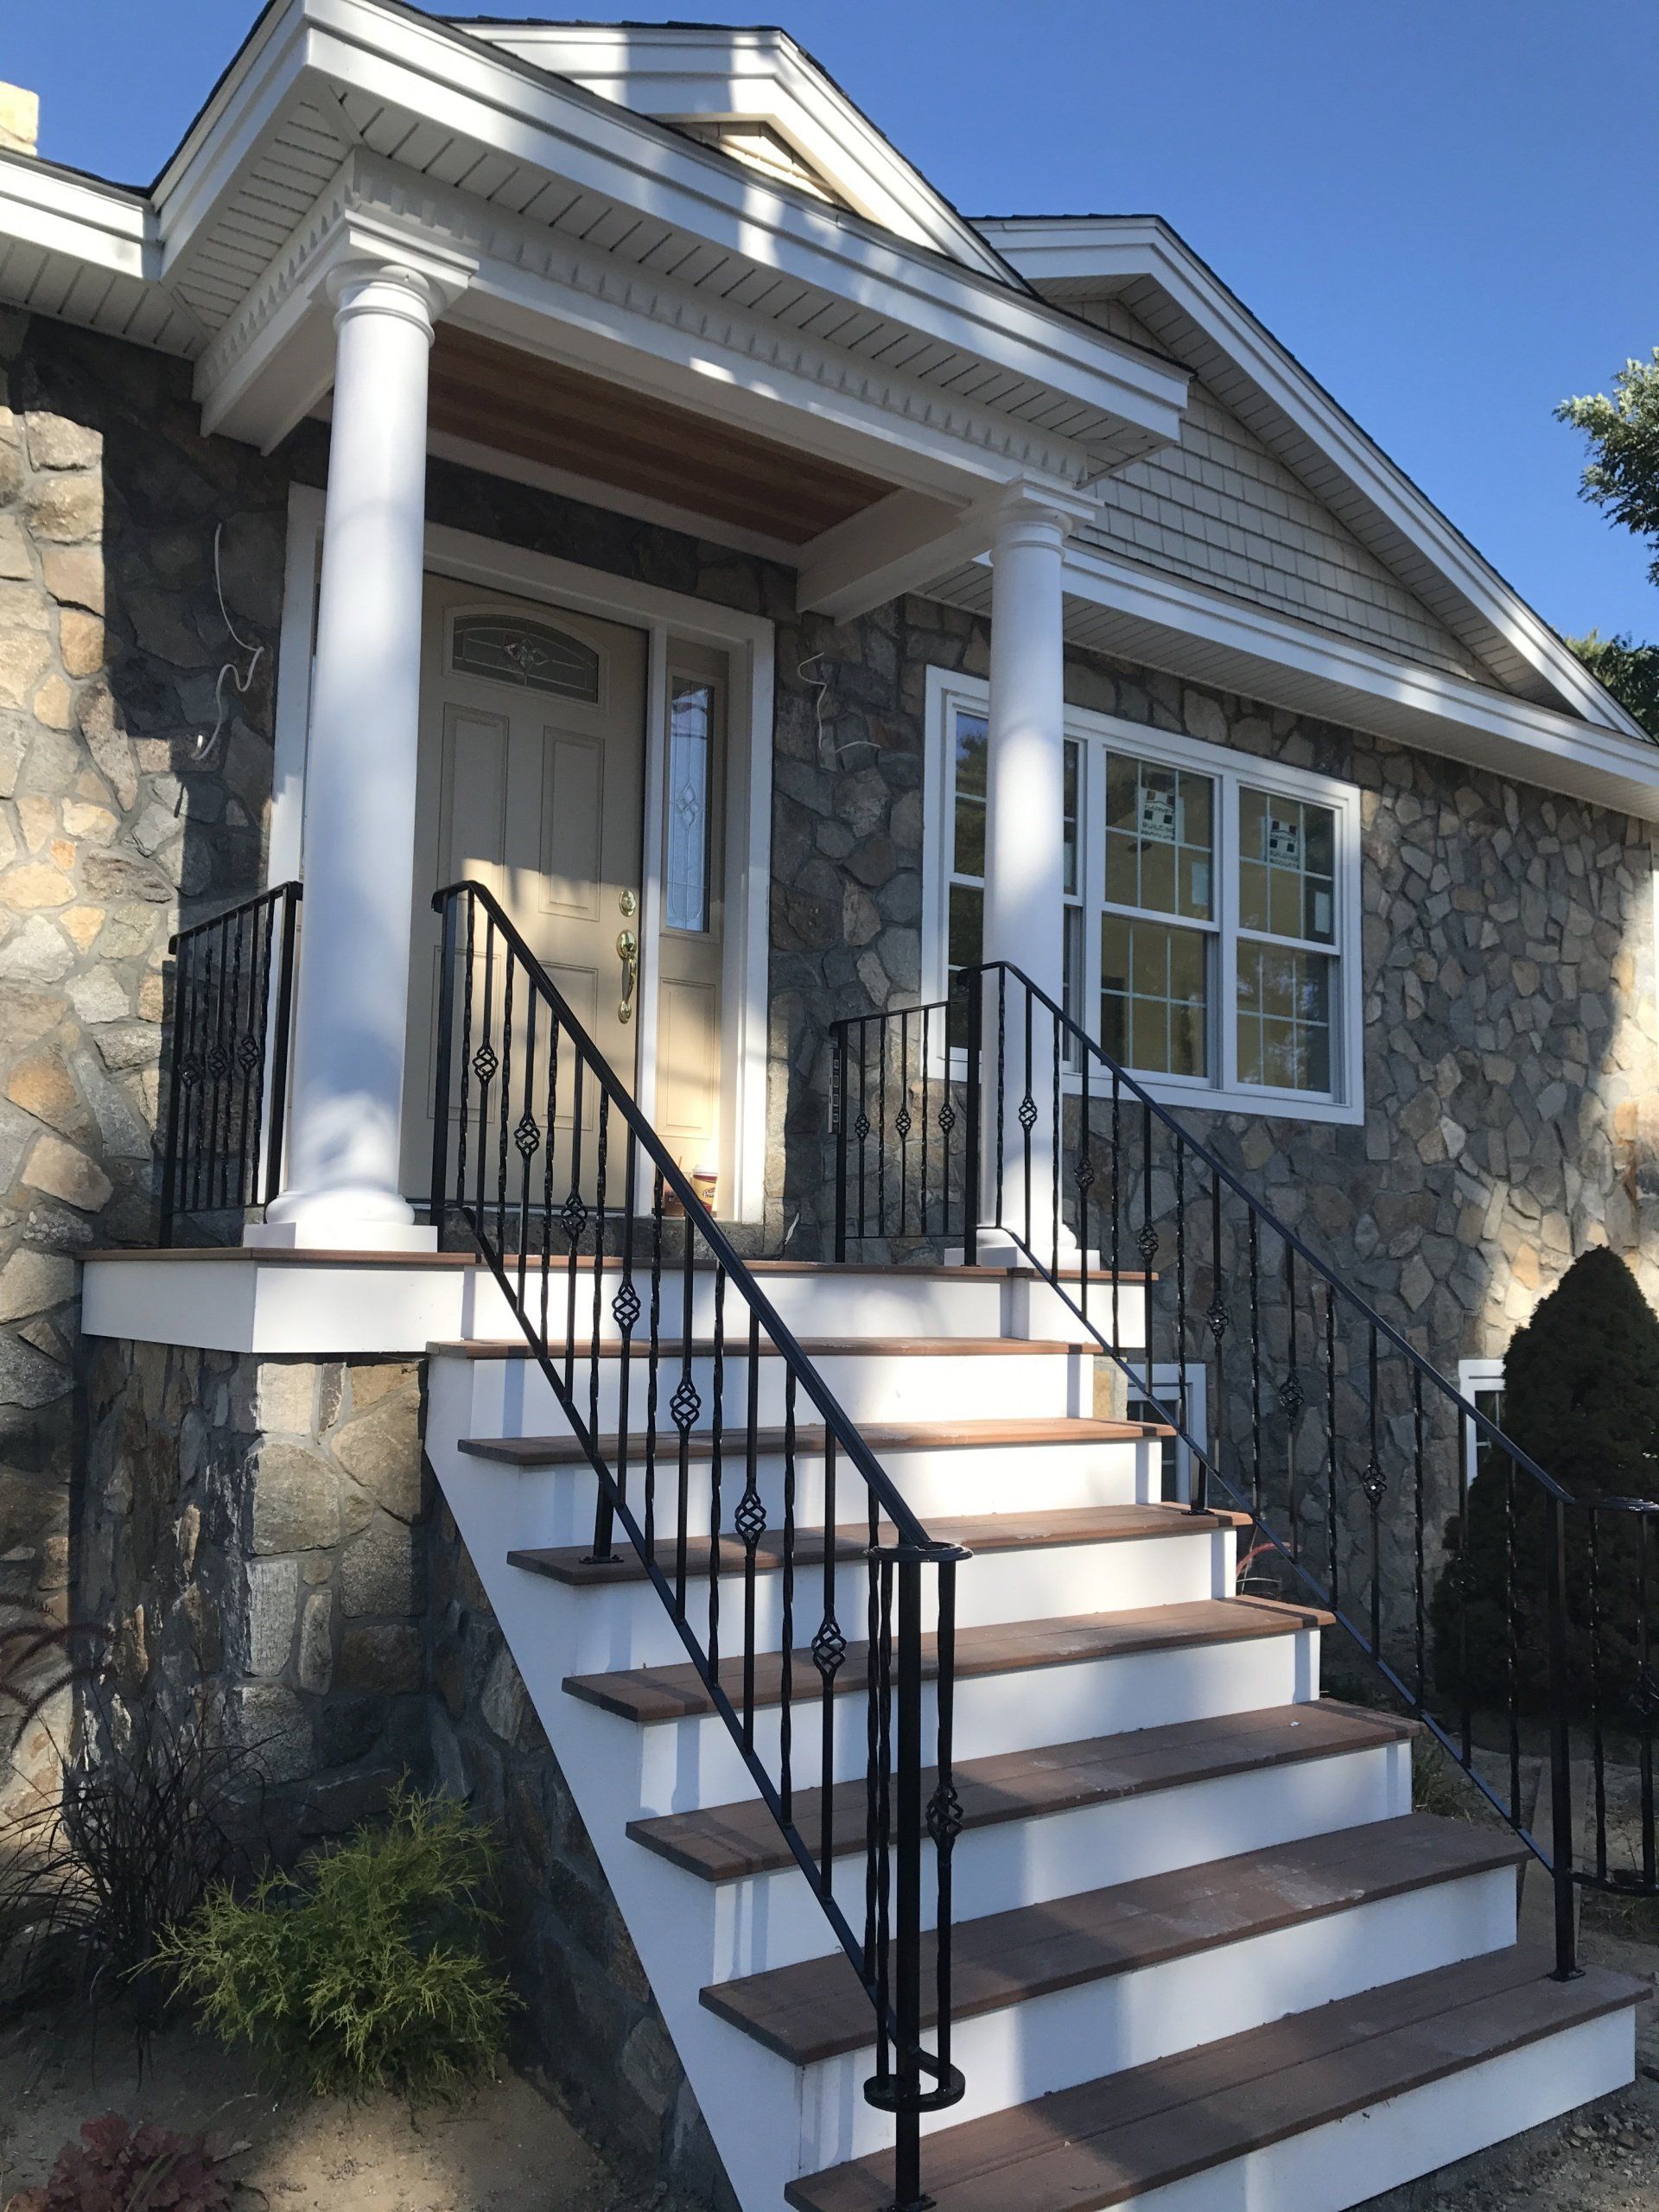 Metal railing around house in Southern New Hampshire